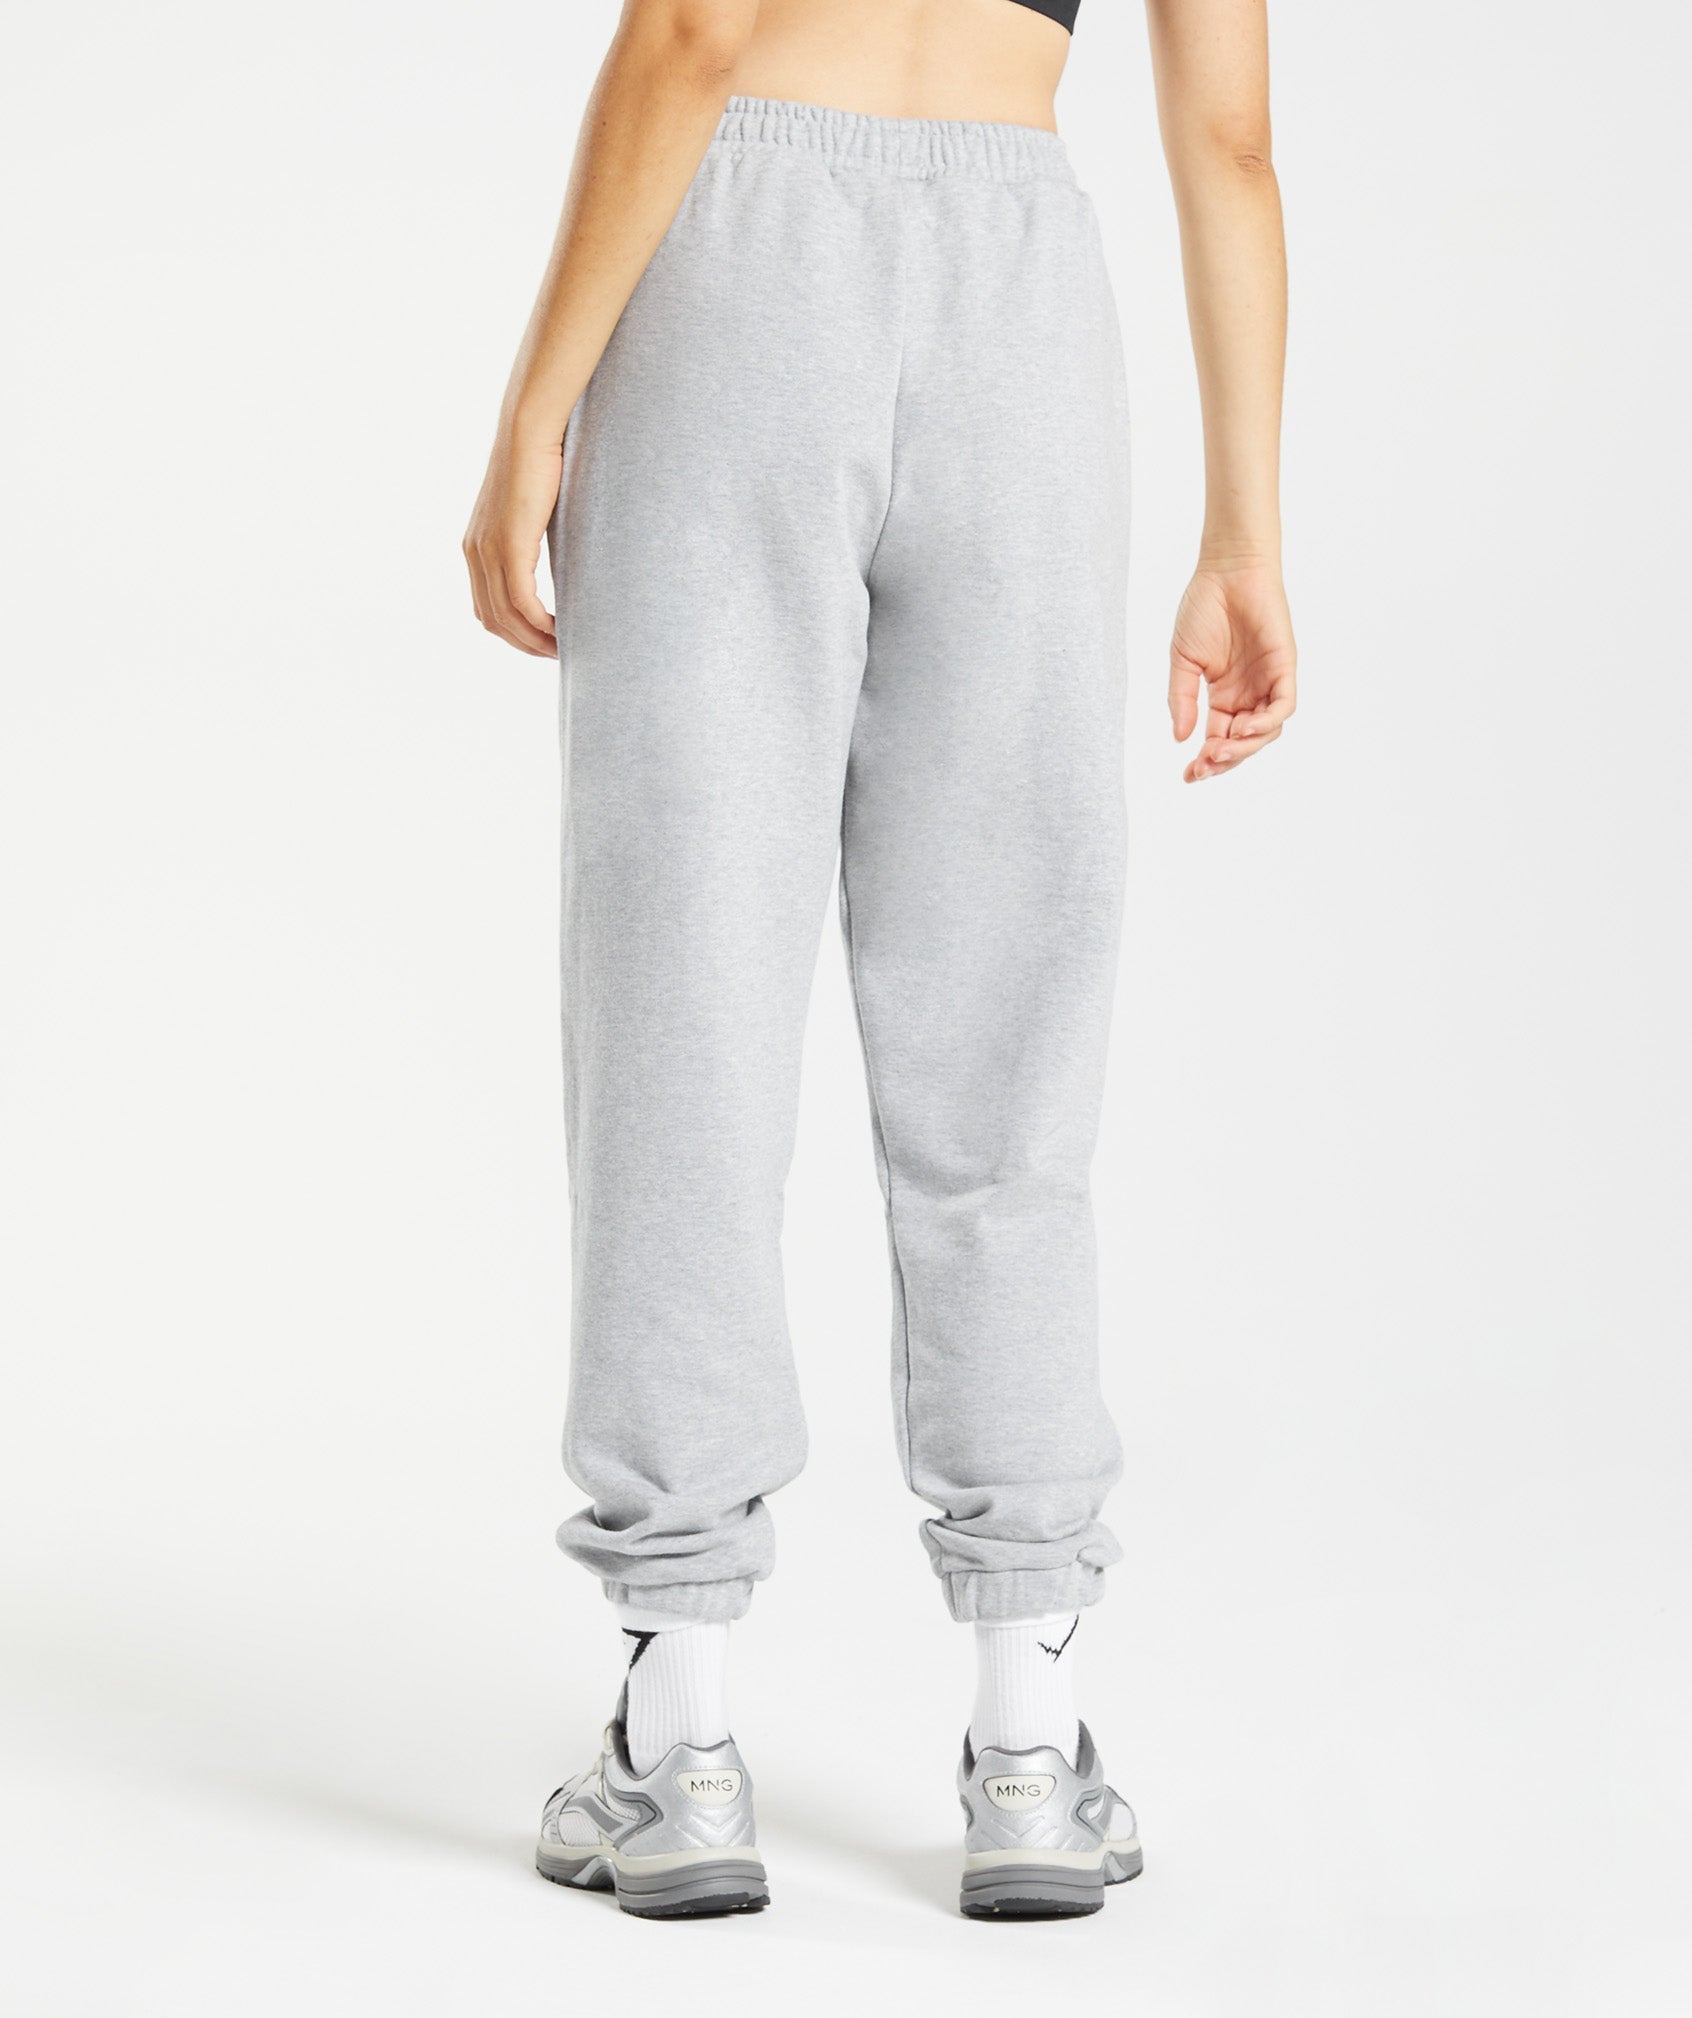 Rest Day Sweats Joggers in Light Grey Core Marl - view 2